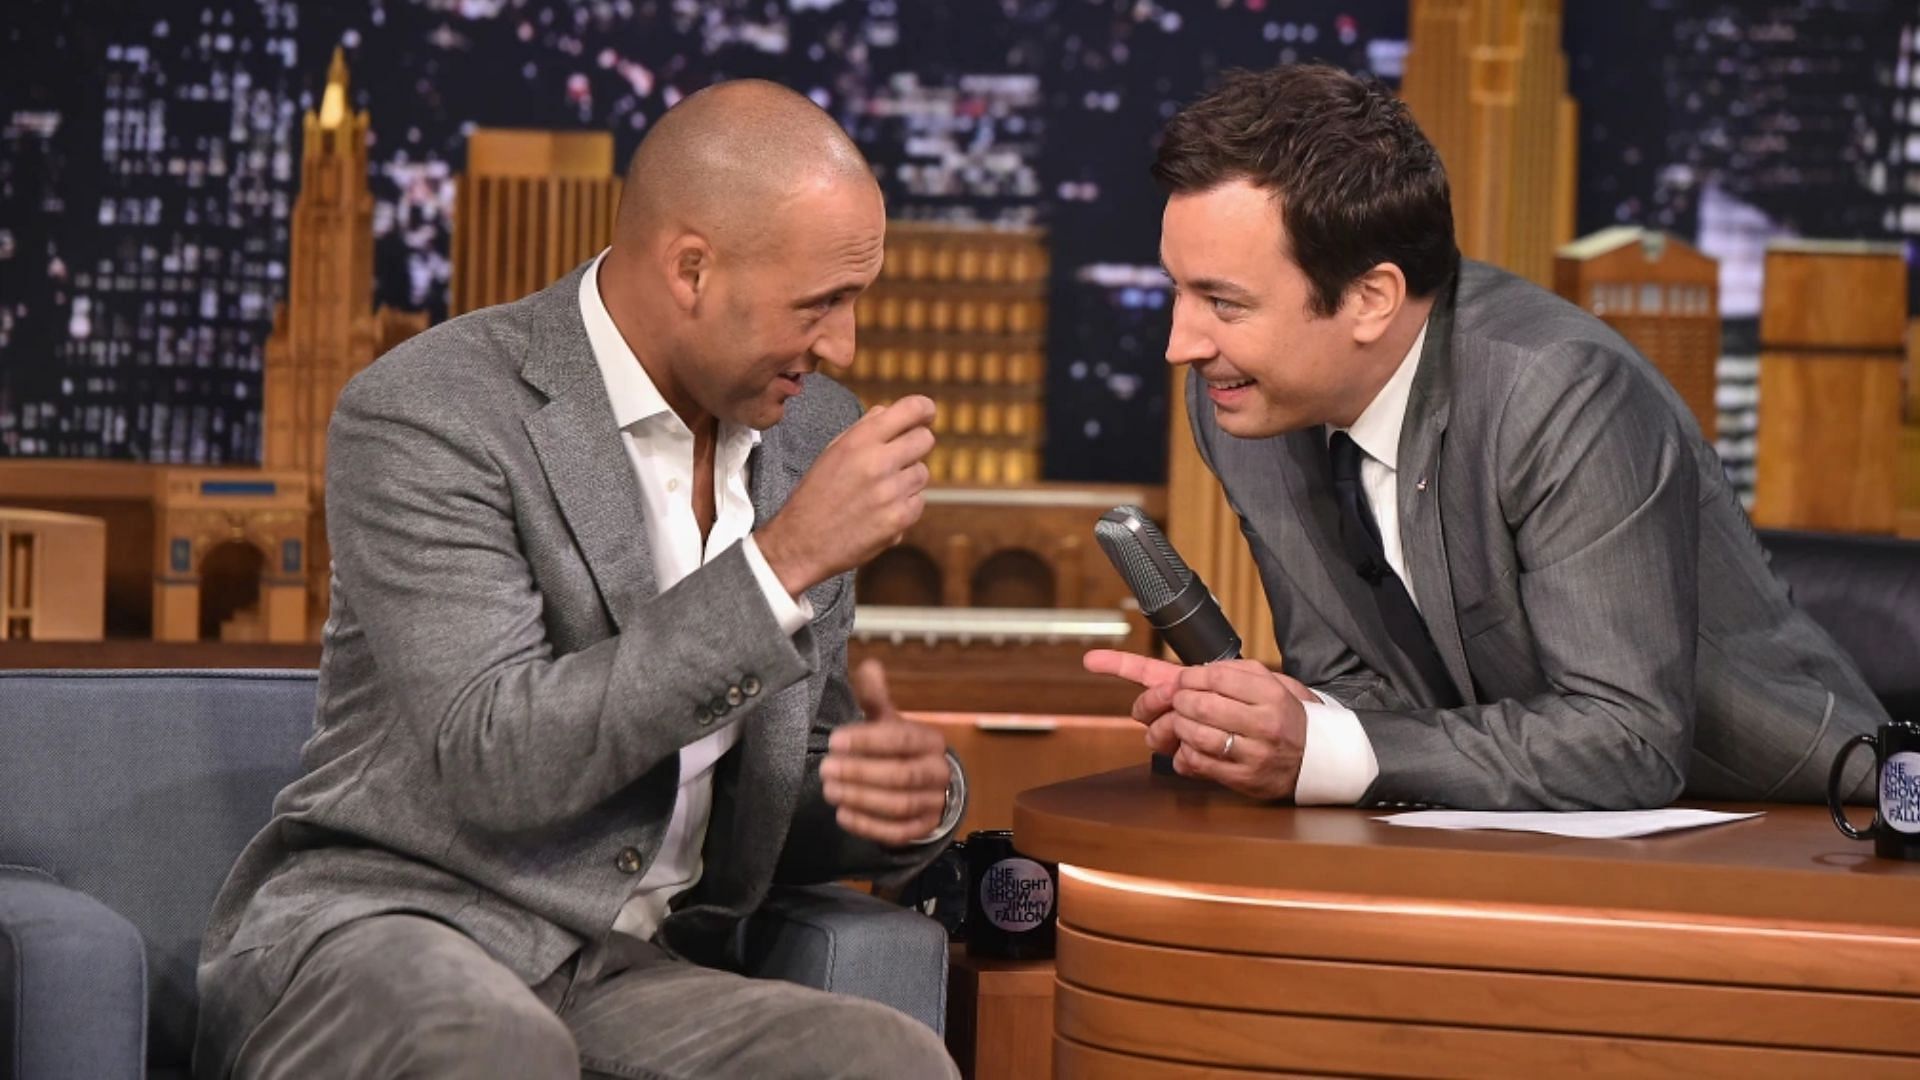 Derek with Jimmy Fallon on &quot;The Tonight Show.&quot;